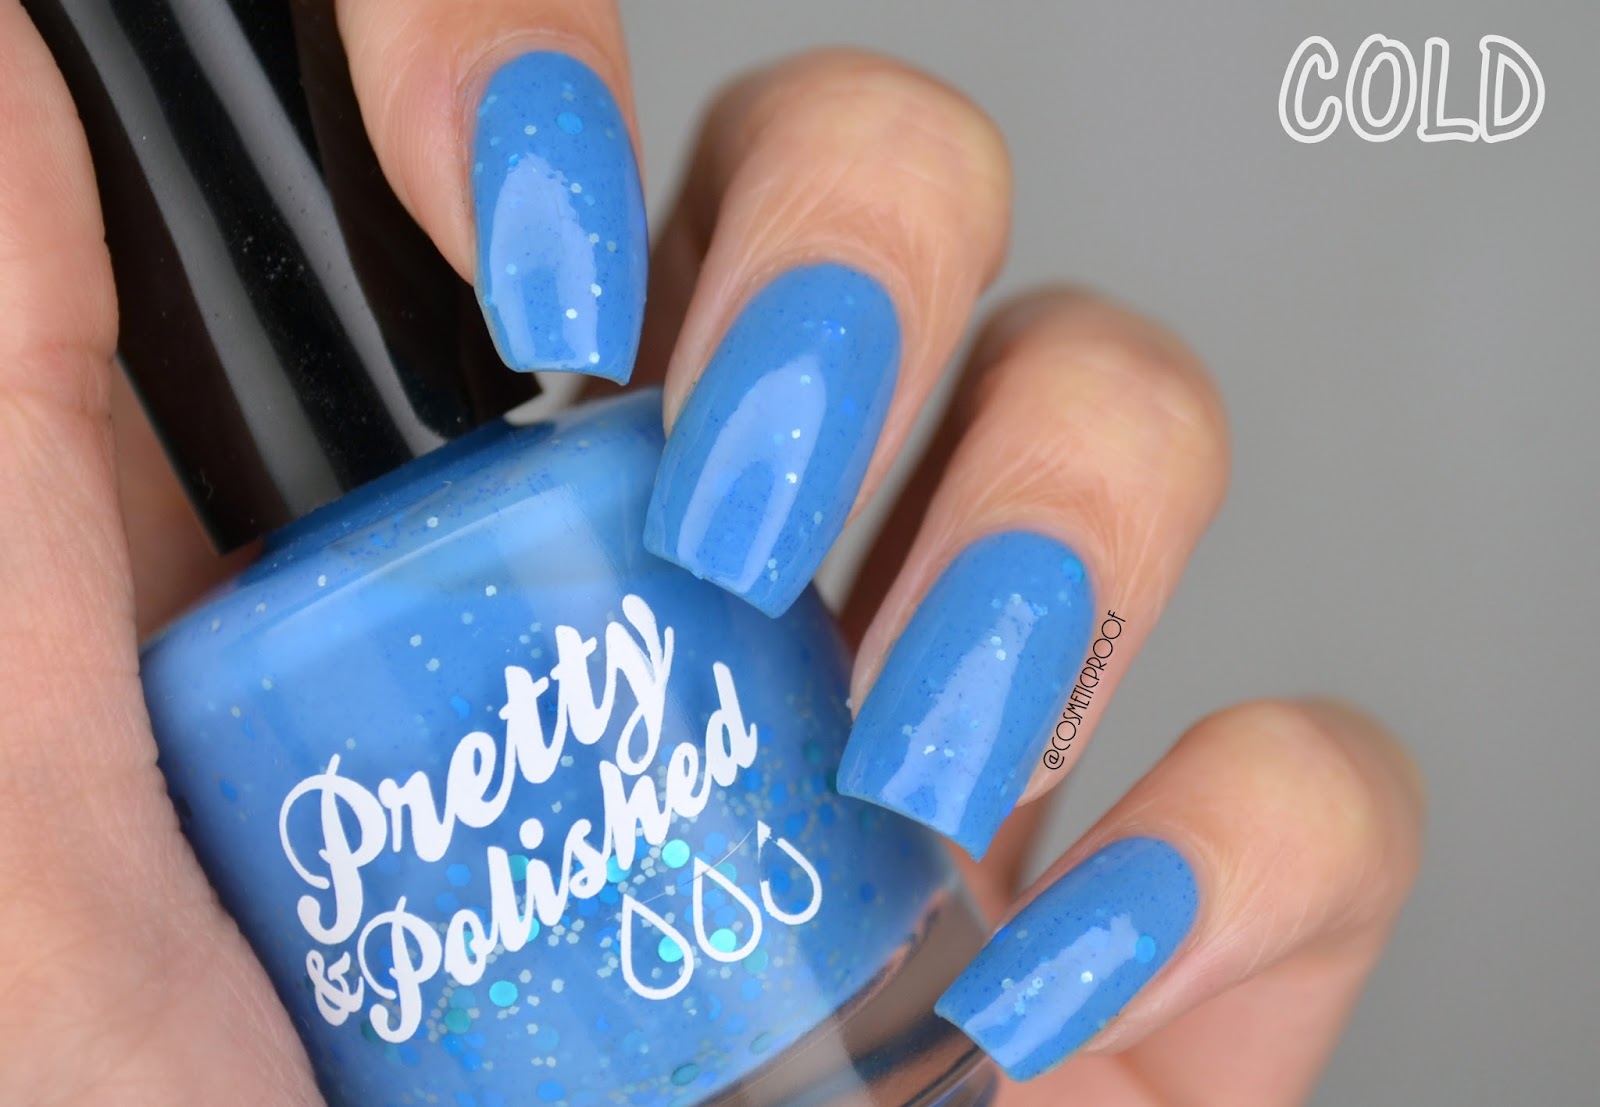 NAILS  Pretty & Polished April Showers Swatch (It's a Thermal